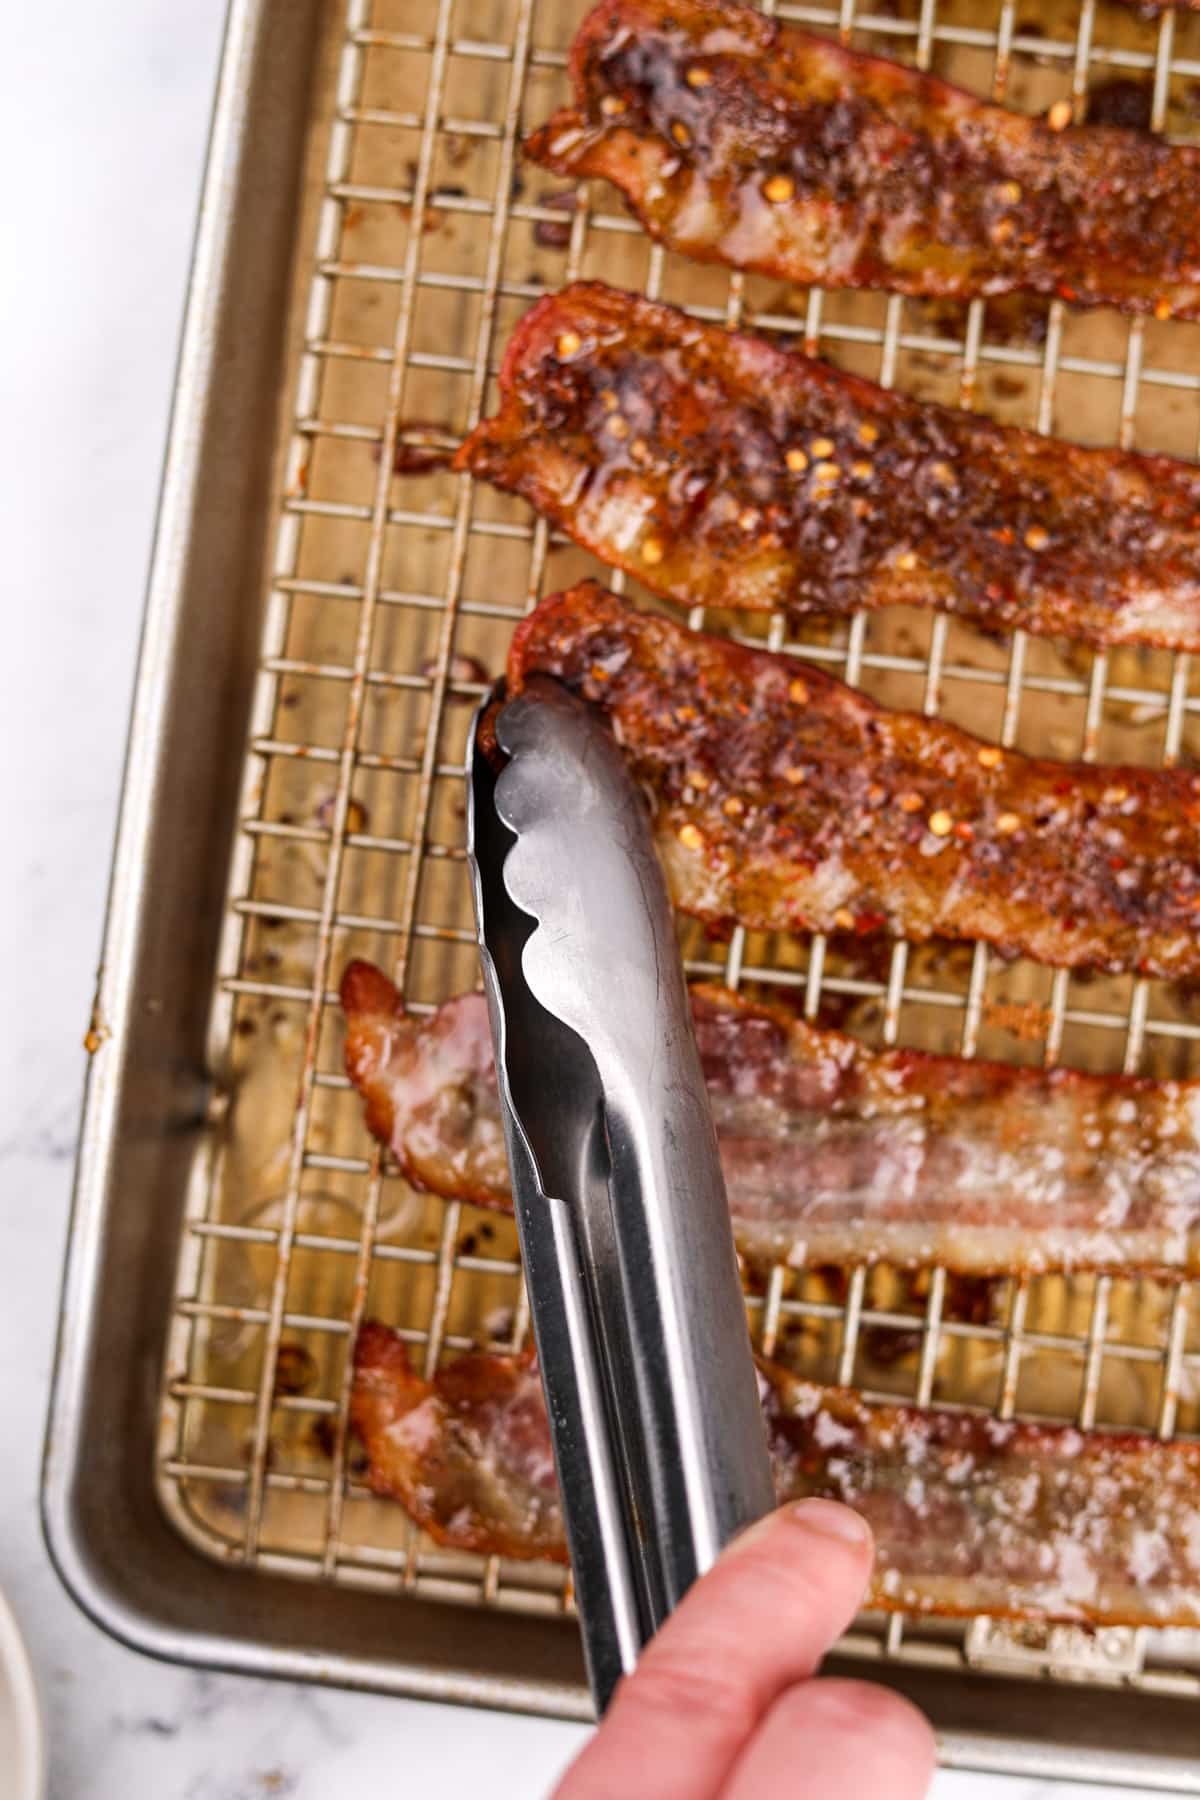 A pair of tongs flipping bacon on a baking sheet.